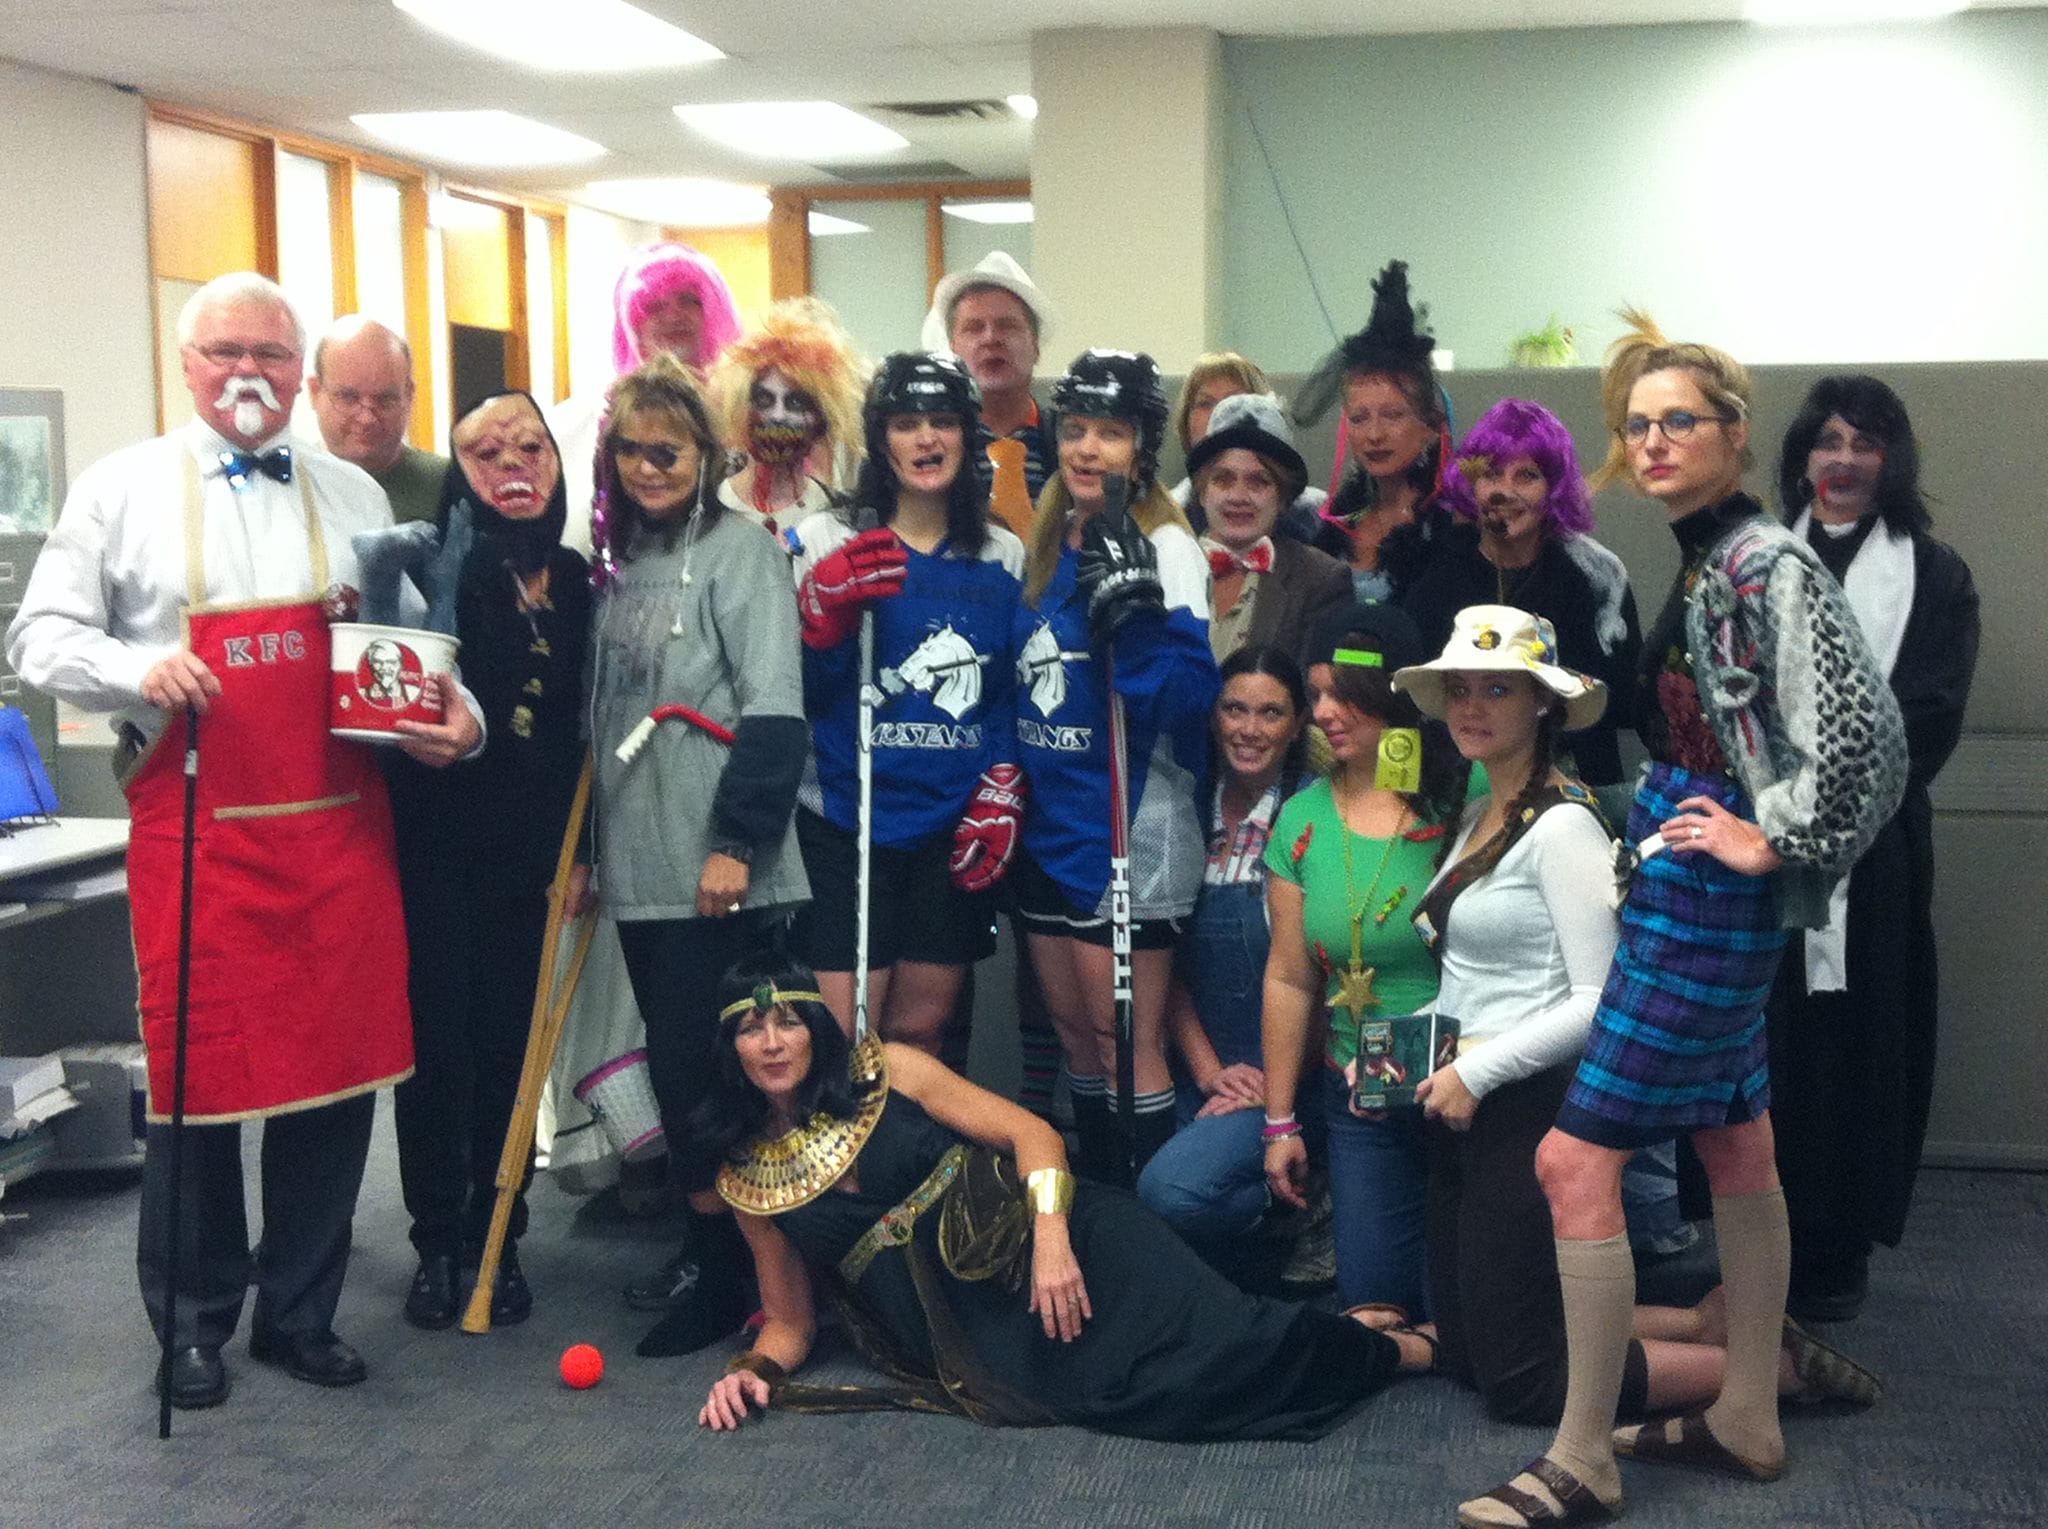 Staff dressing up for Halloween